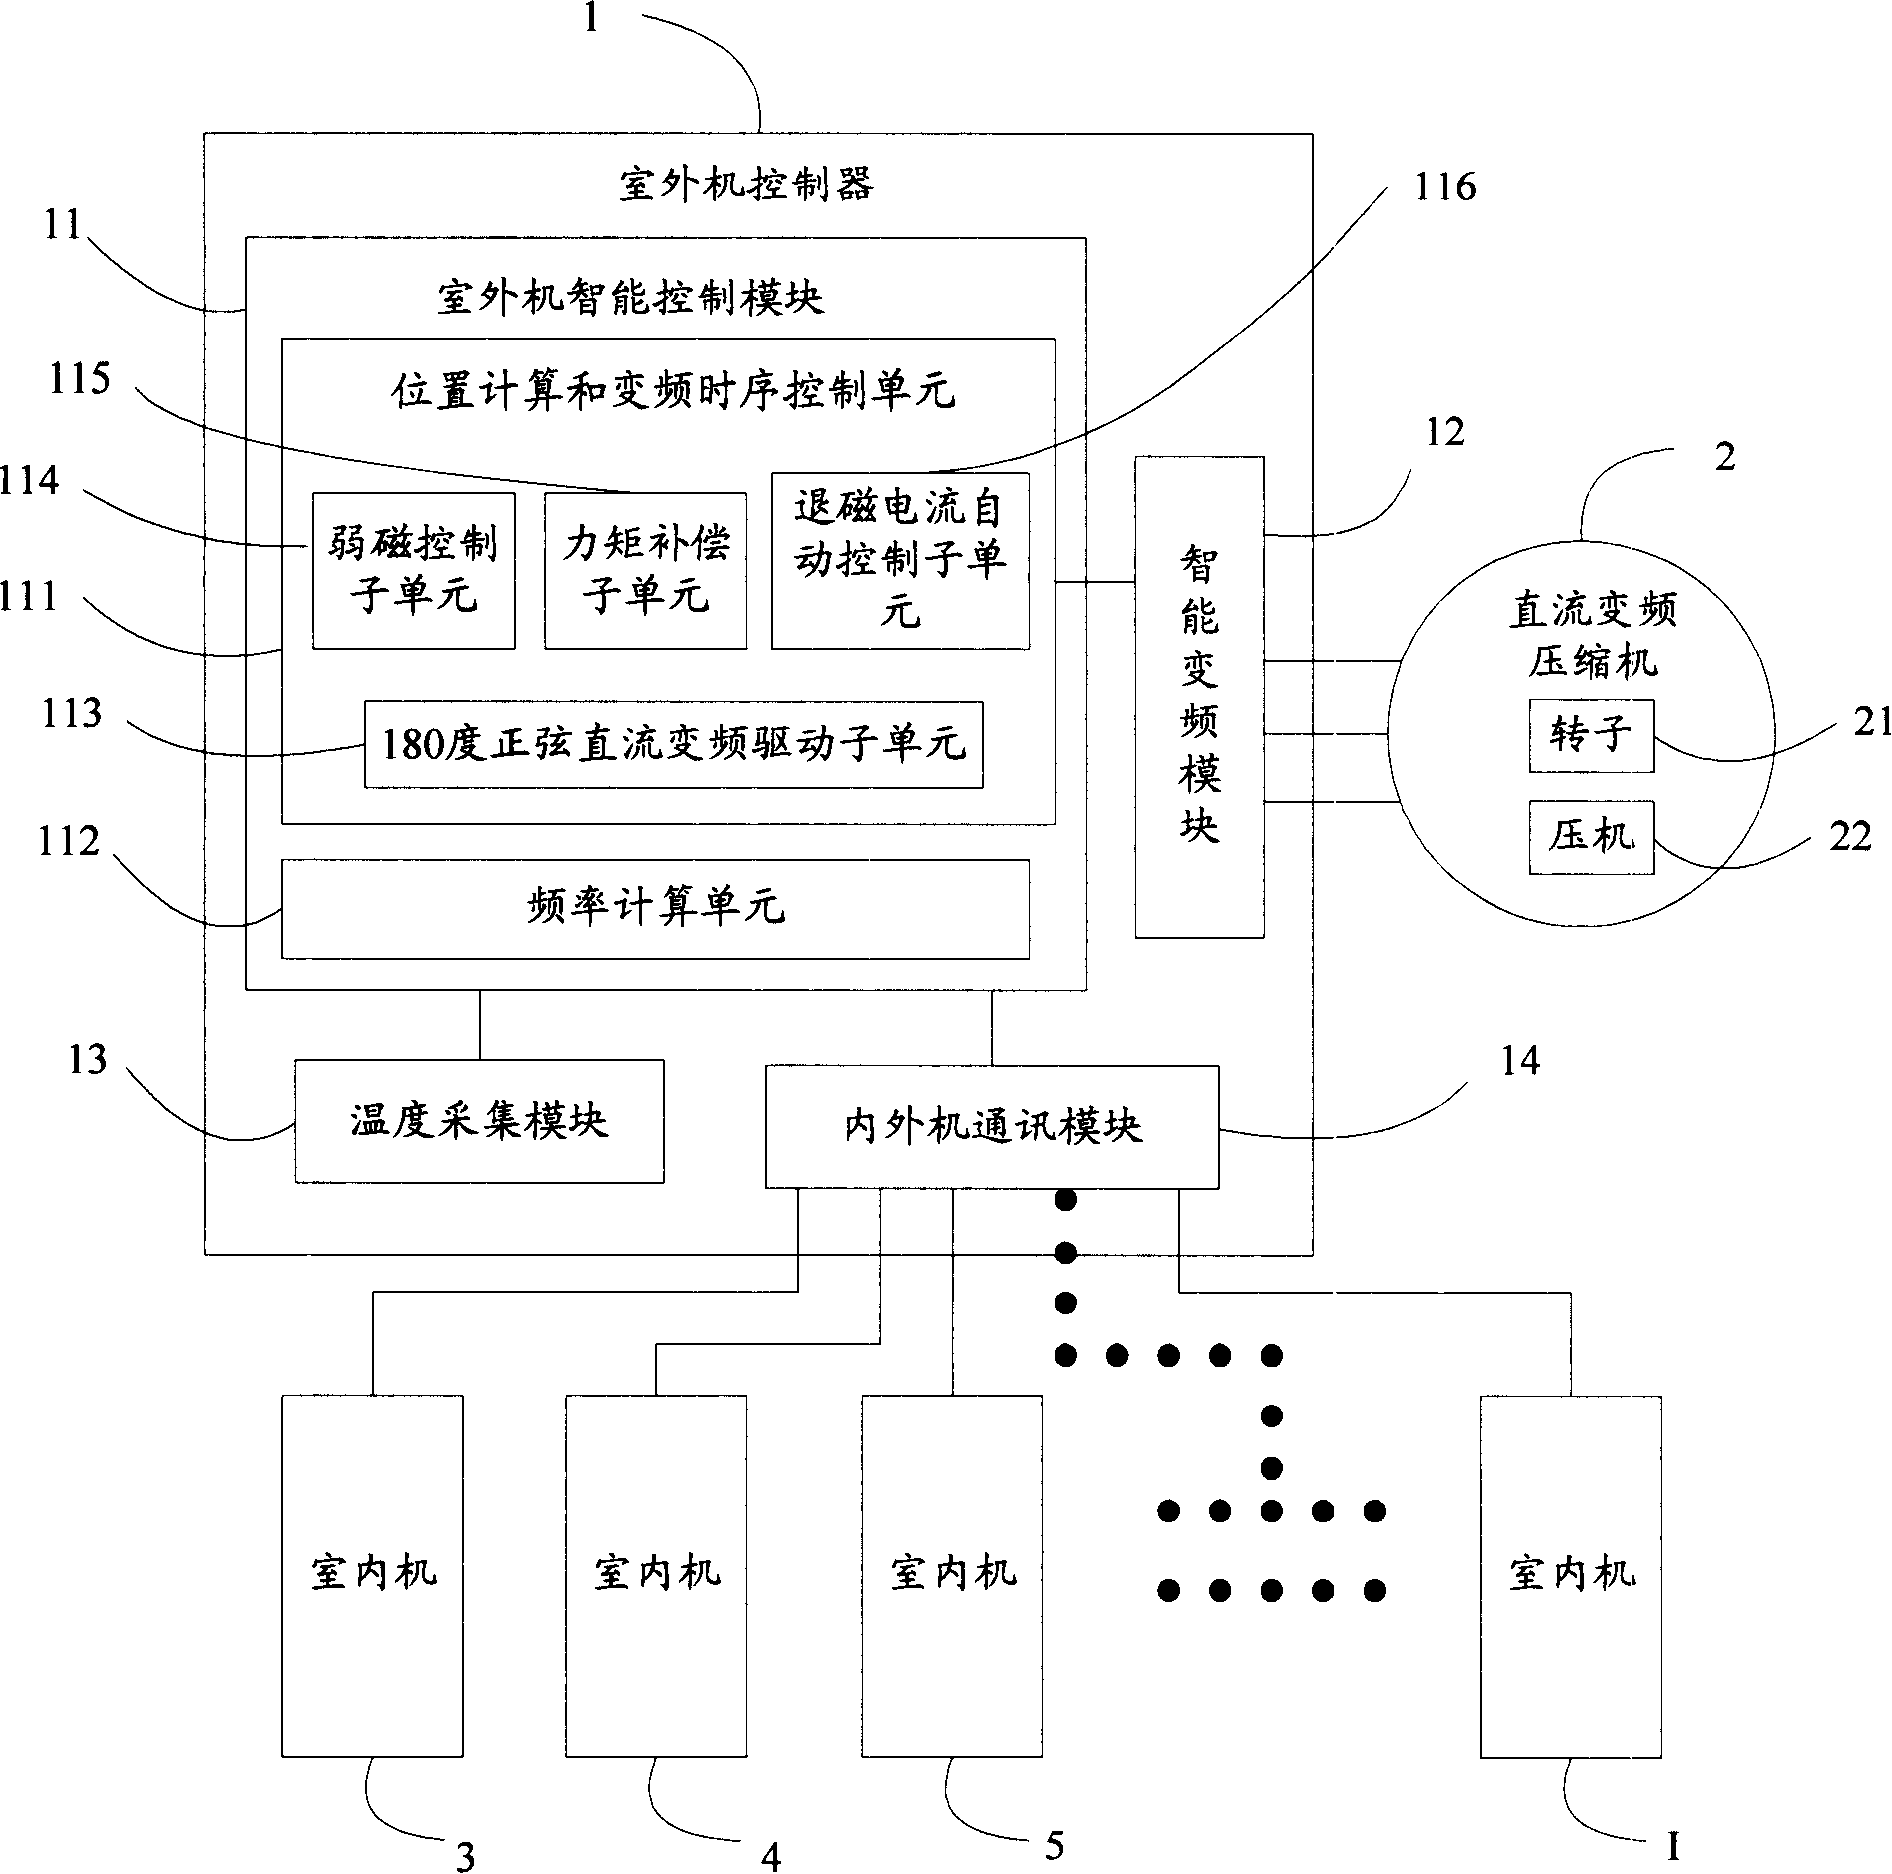 Sine DC frequency conversion multi-split air conditioner control system and its control method